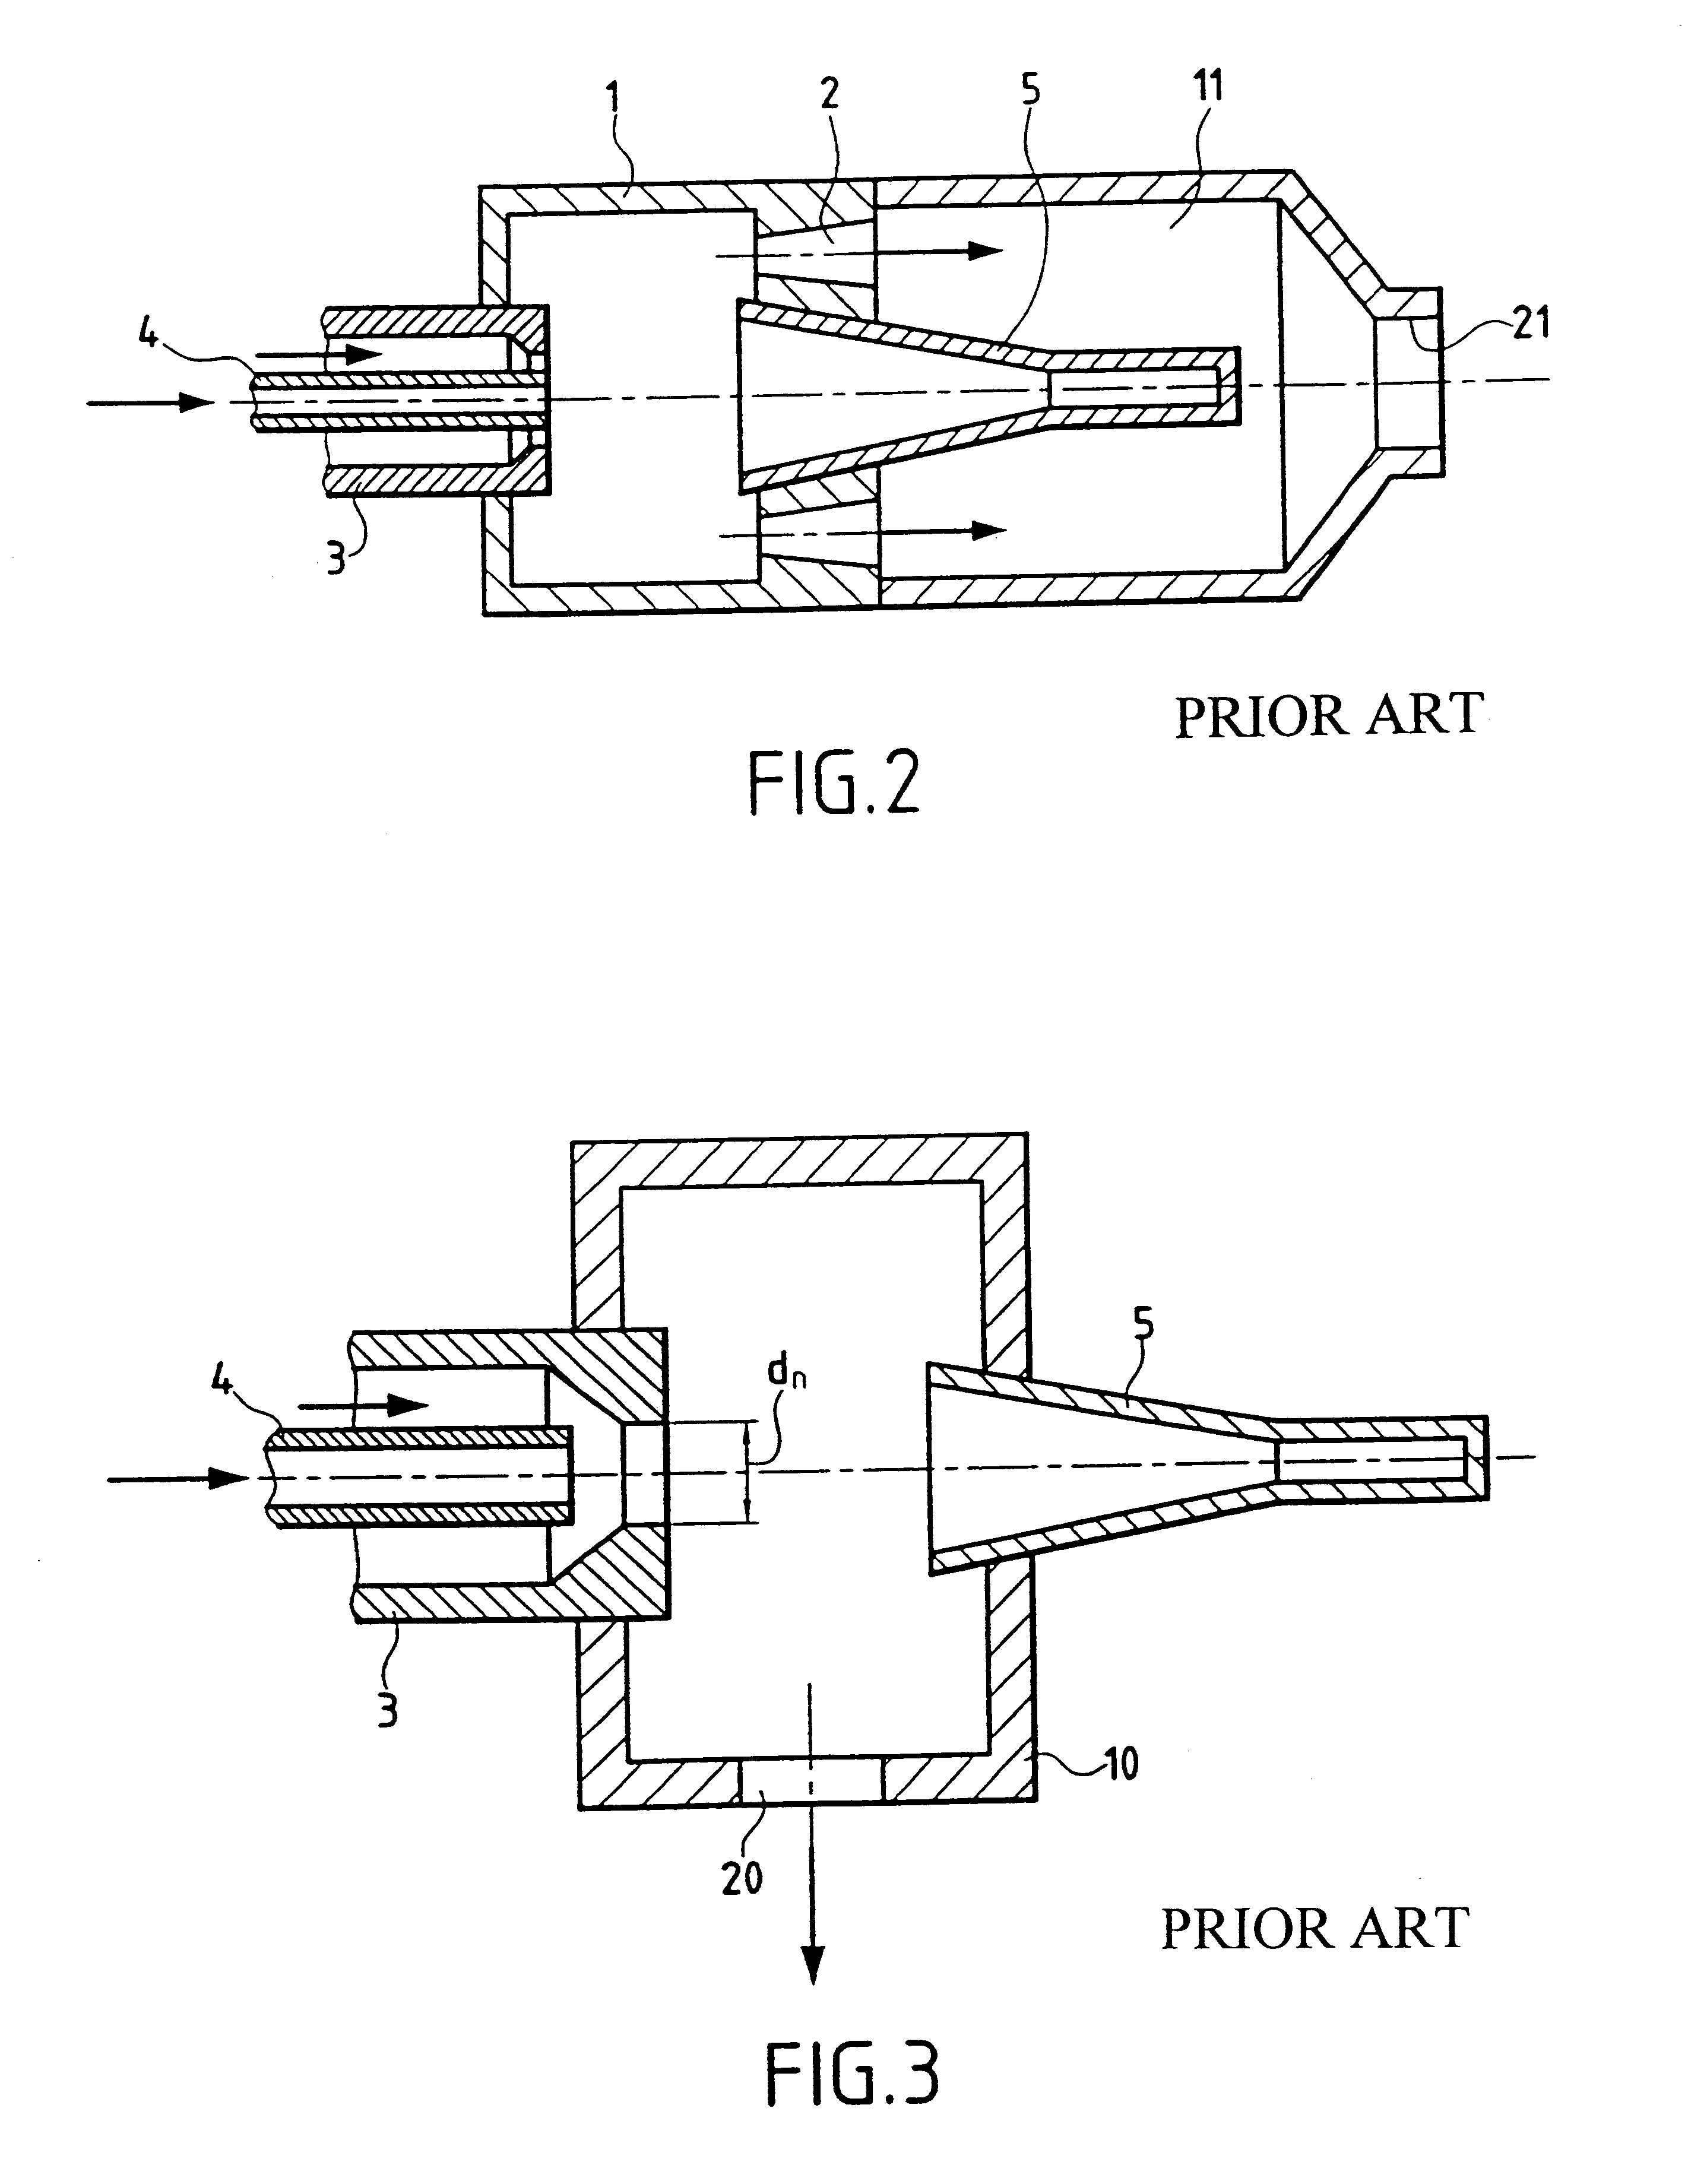 Acoustic igniter and ignition method for propellant liquid rocket engine